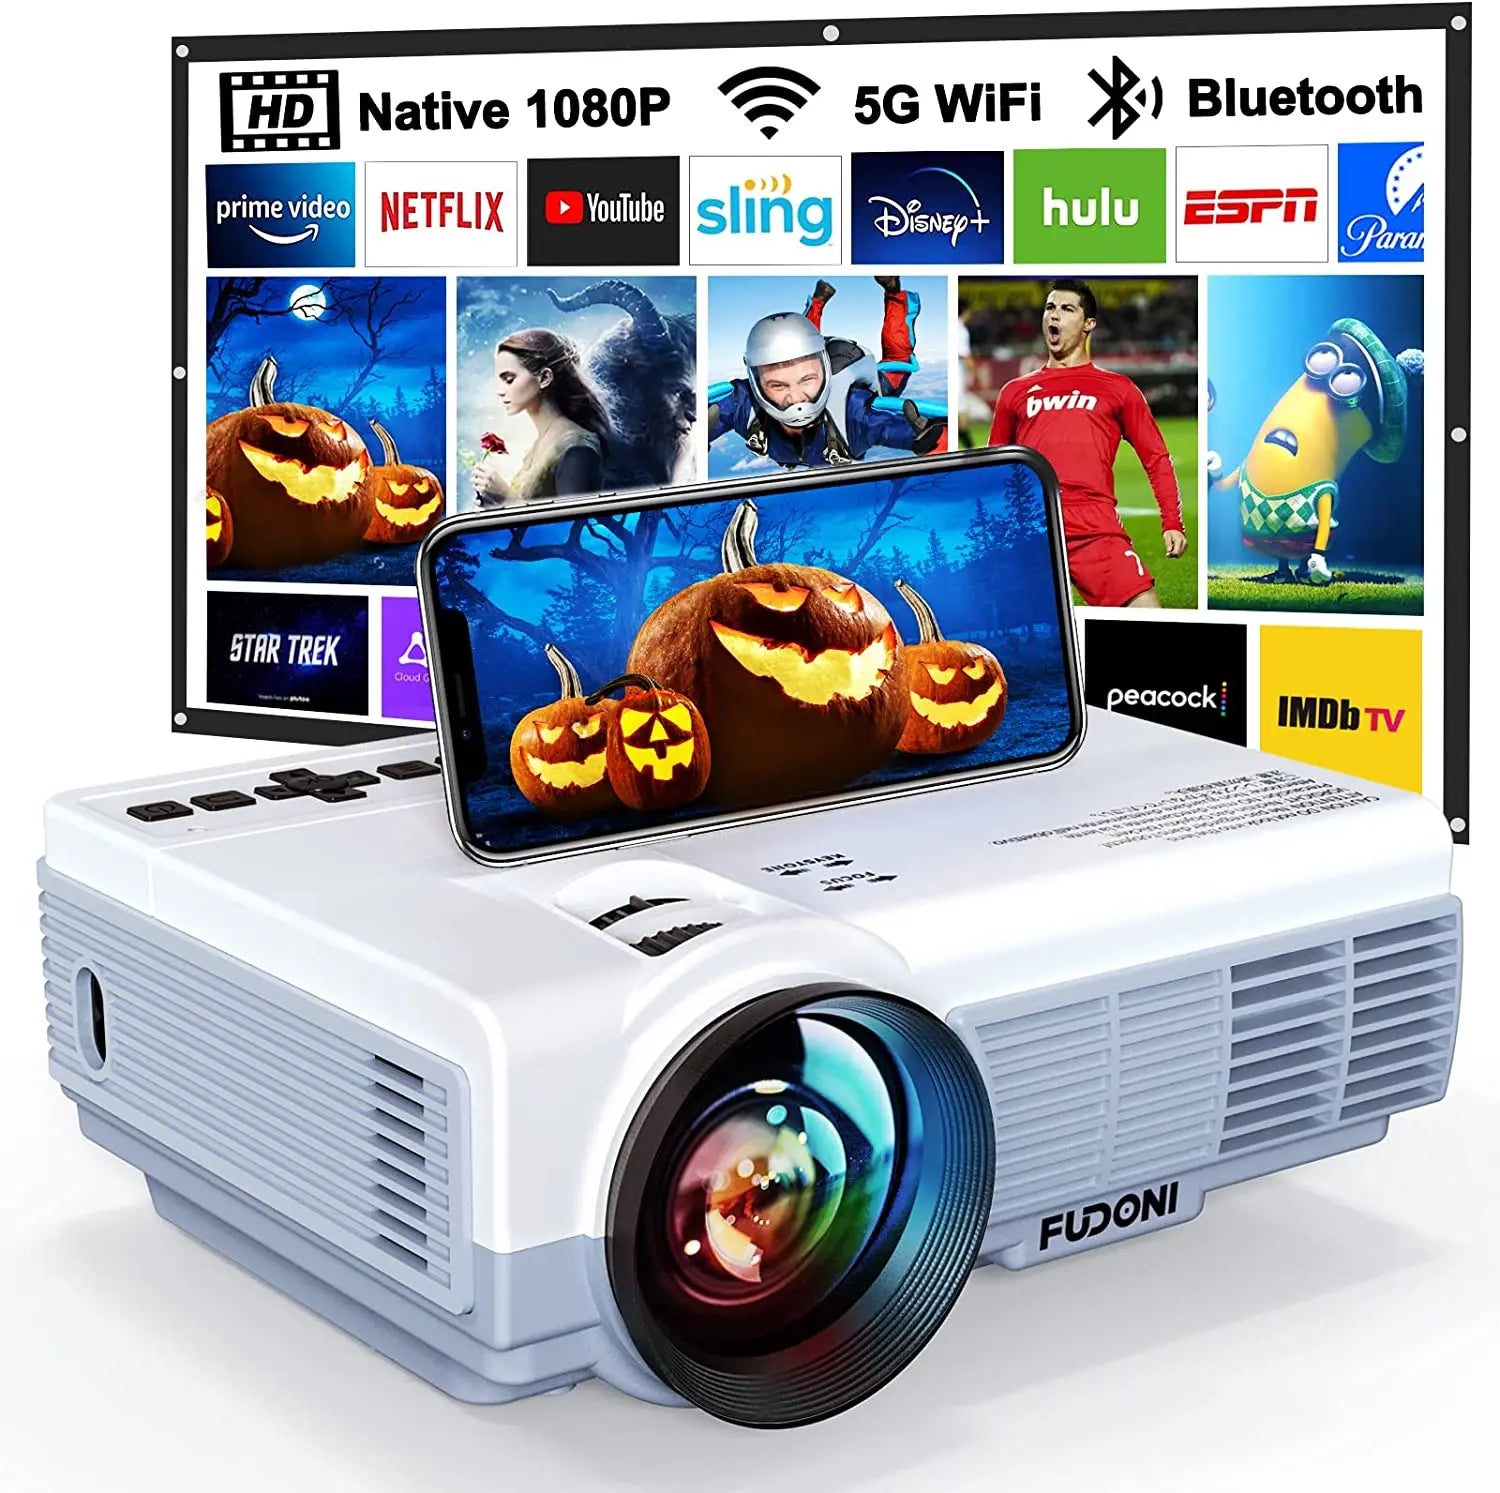 FUDONI Portable Movie Projector with WiFi and Bluetooth,5G WiFi Native  1080P Video Projector